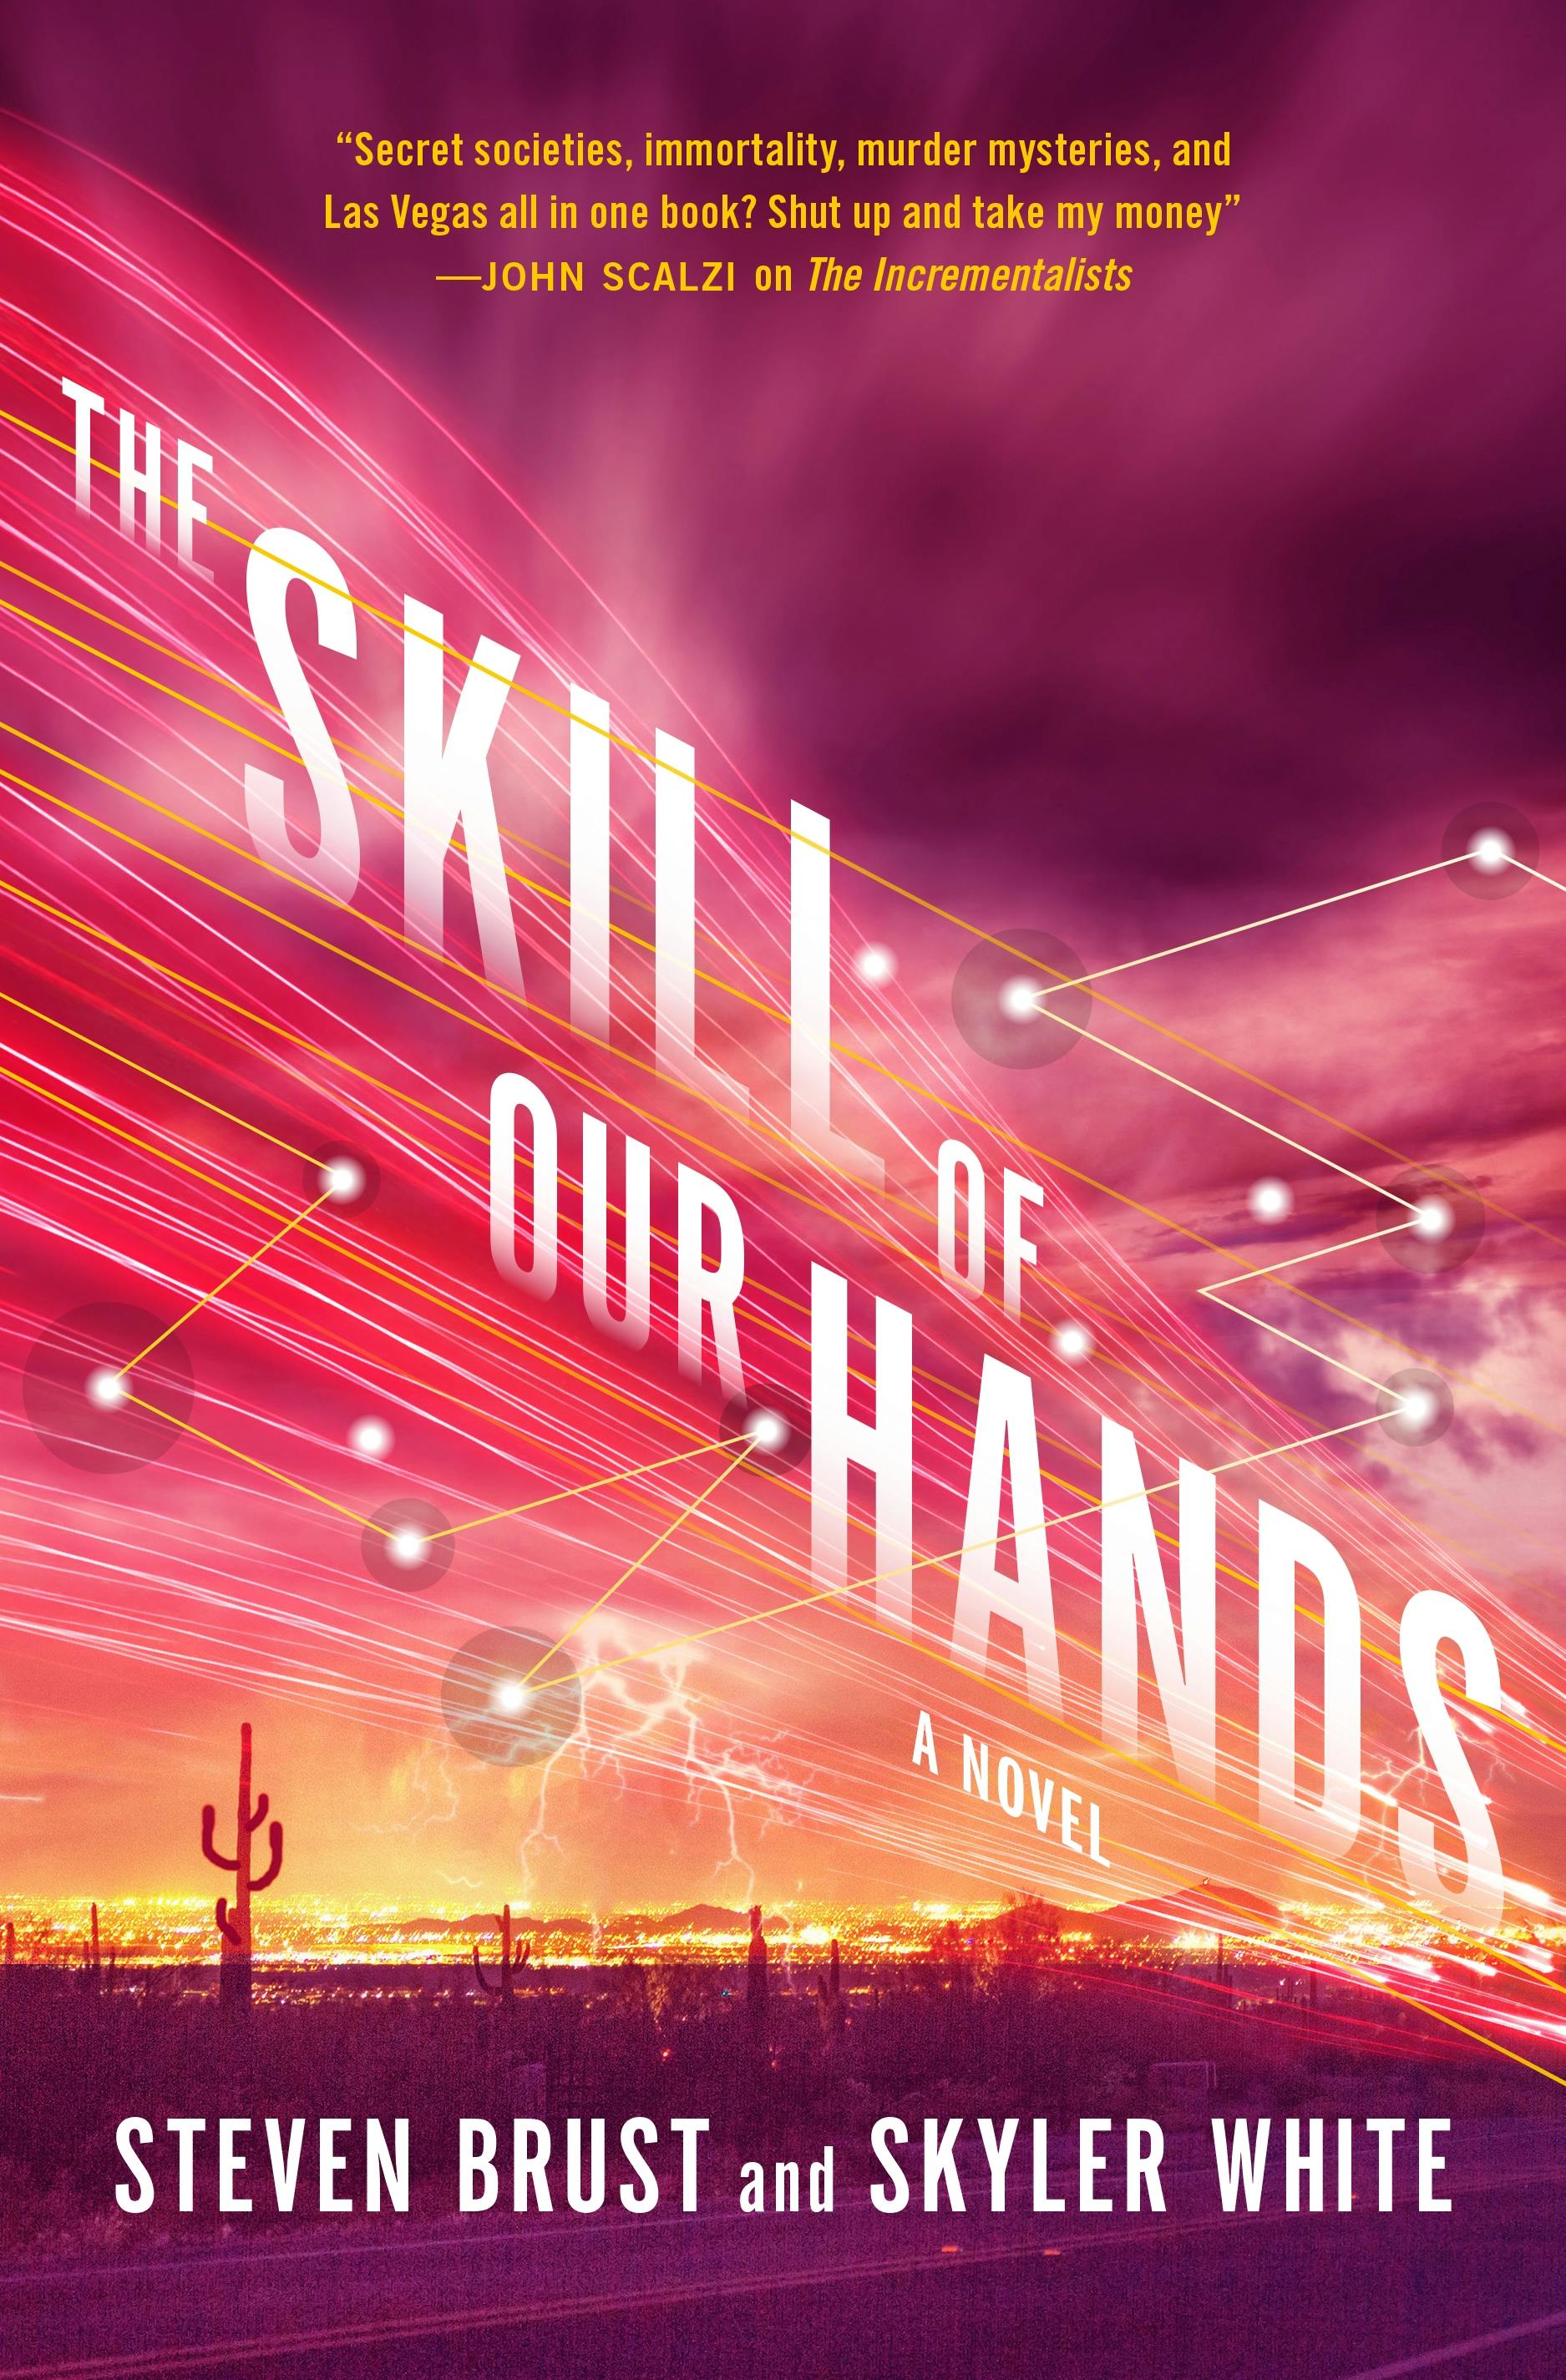 Cover for the book titled as: The Skill of Our Hands